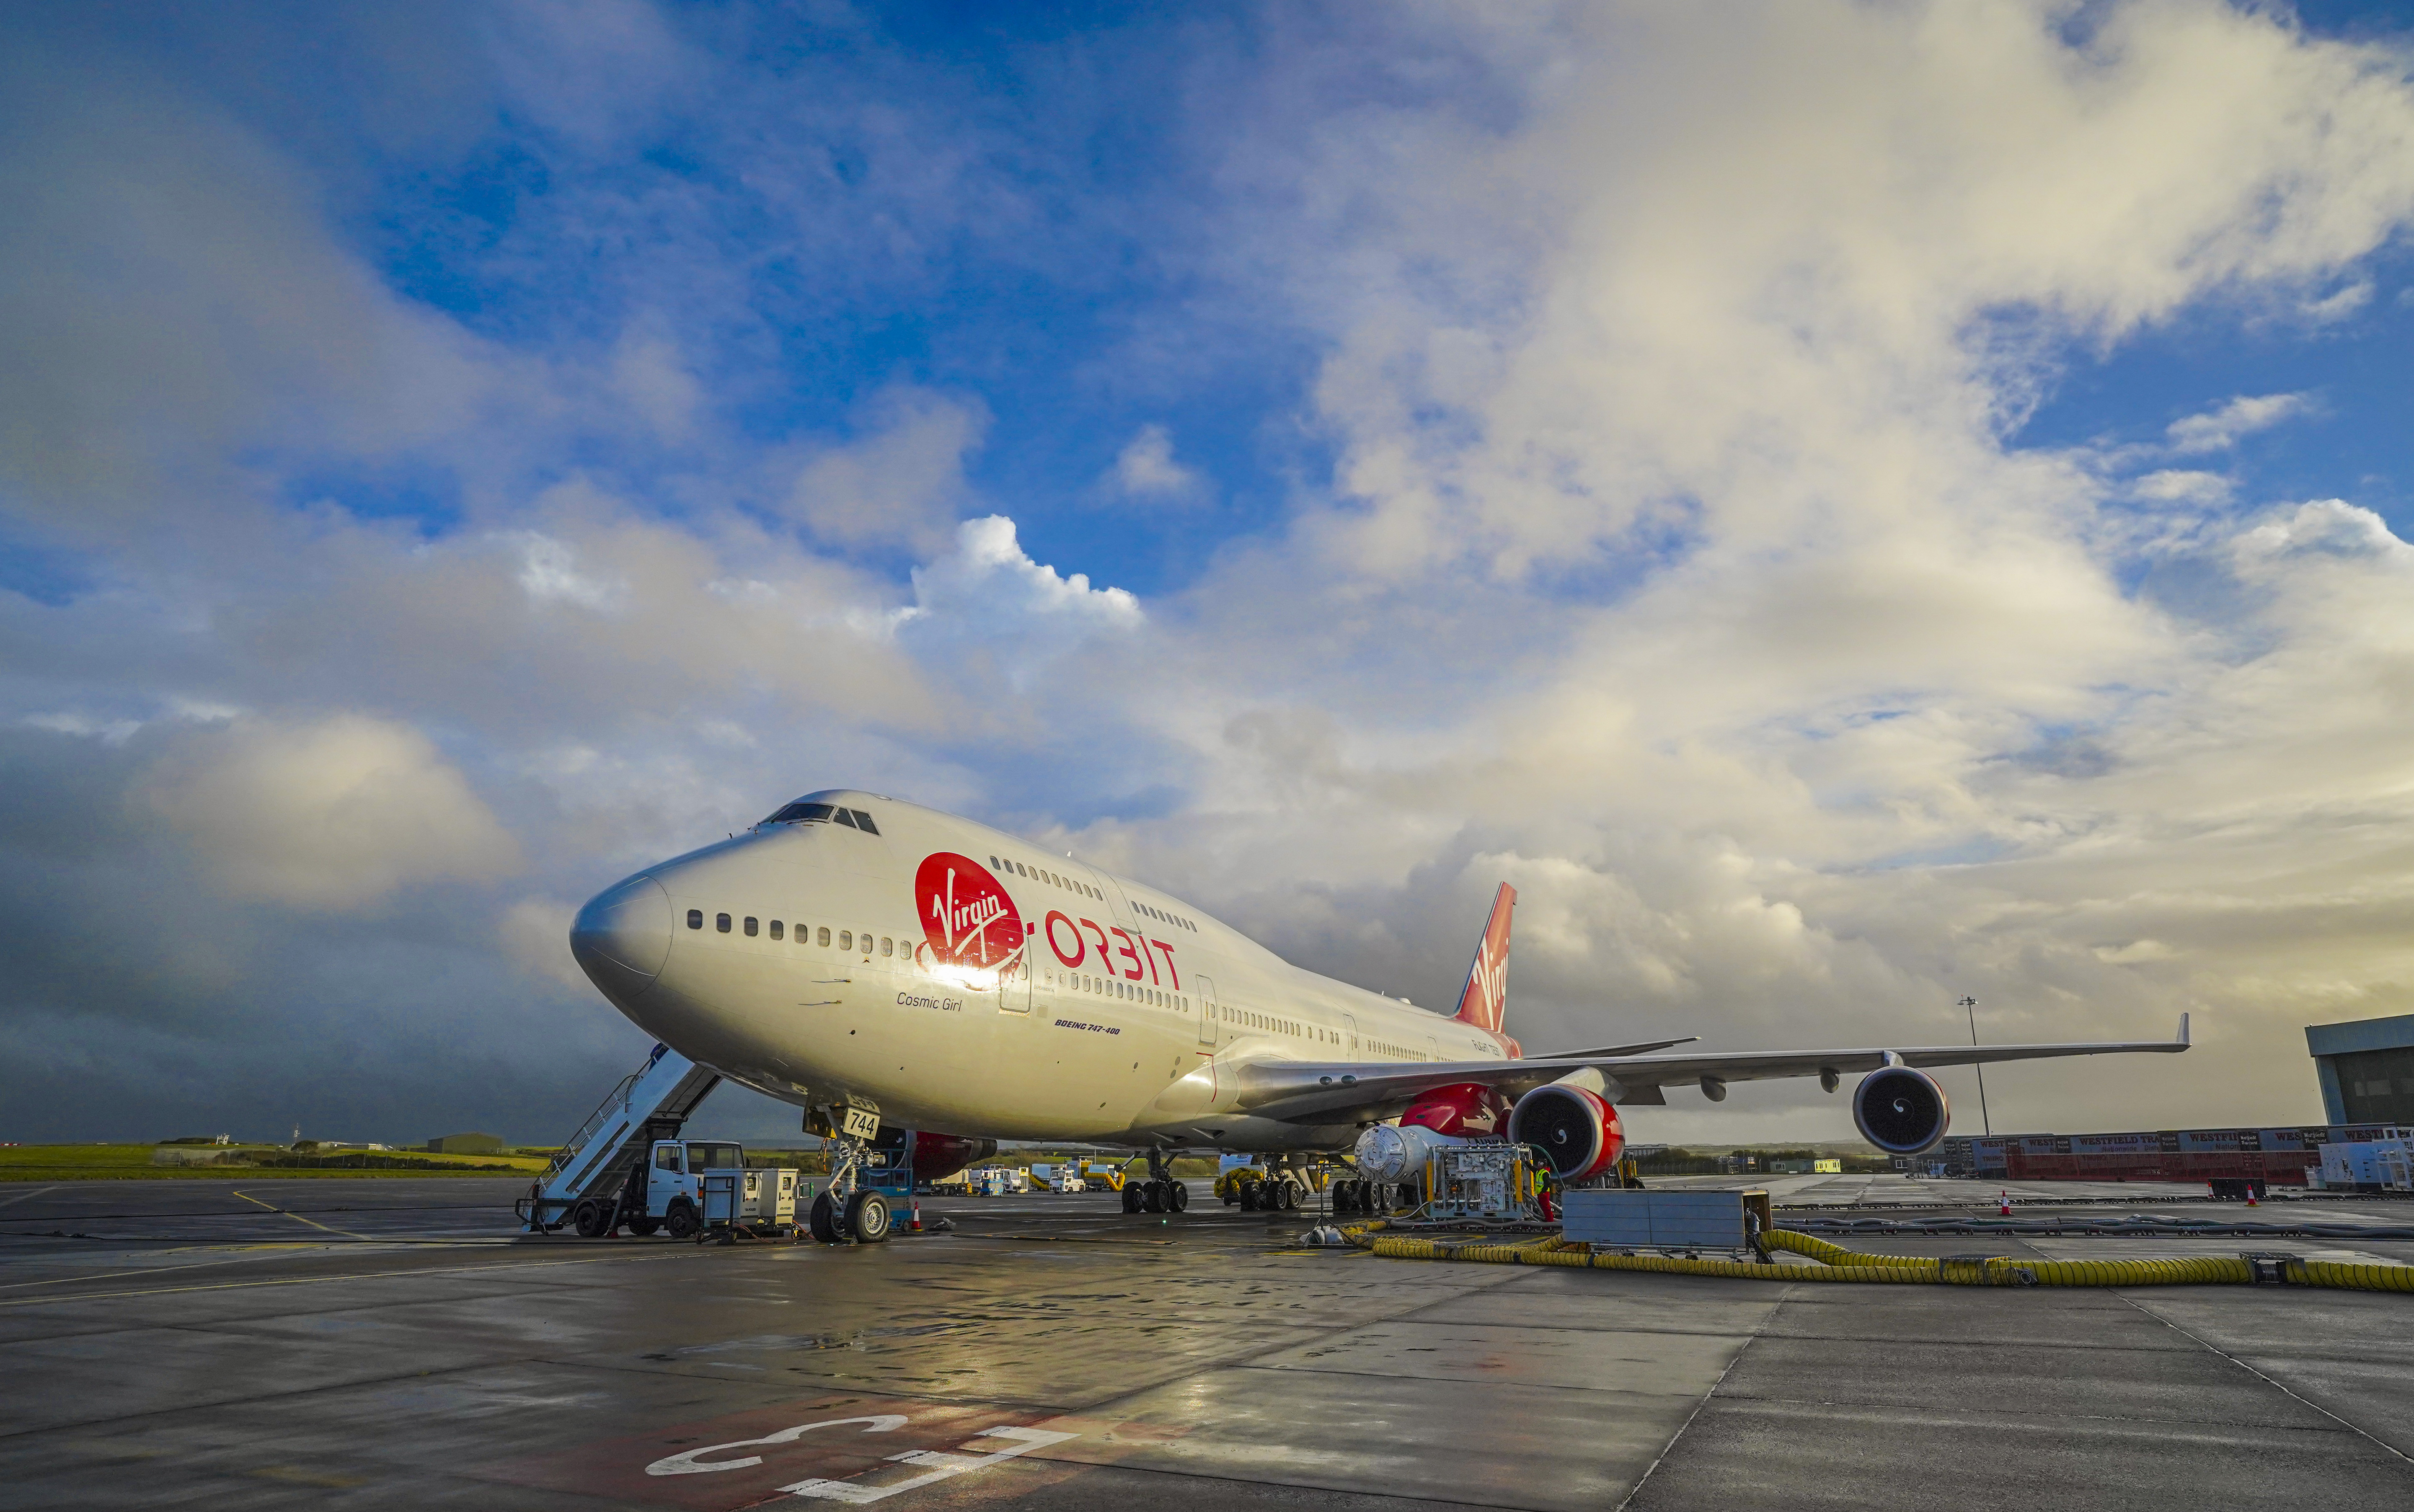 Cosmic Girl, the modified Boeing 747 on November 08, 2022 in Newquay, England. Virgin Orbit's carrier plane "Cosmic Girl," used to carry a rocket, named LauncherOne, under one of its wings. Image: Hugh Hastings / Getty Images